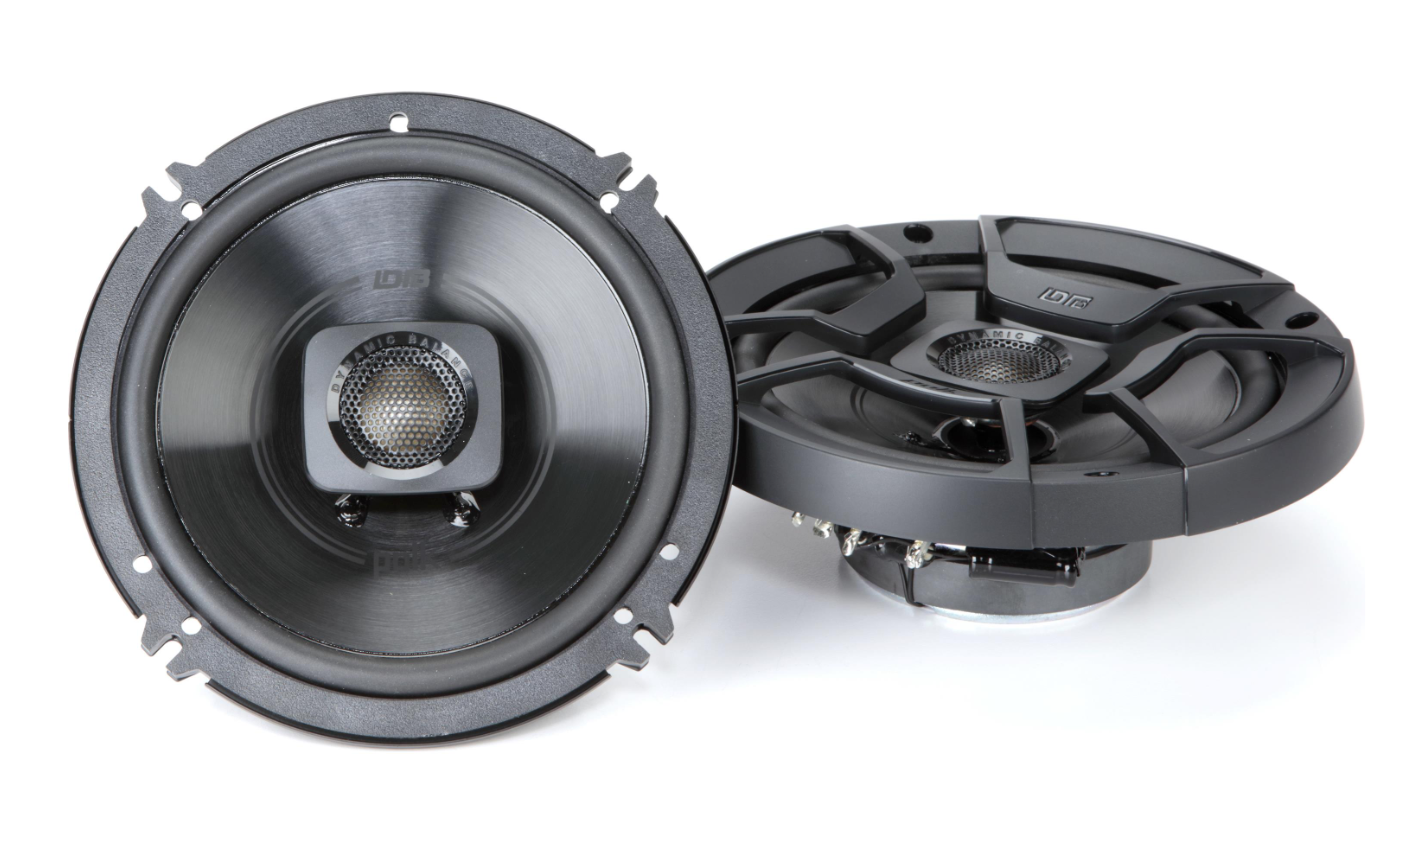 Rock Out On Your Motorcycle With These 6.5 Speakers!